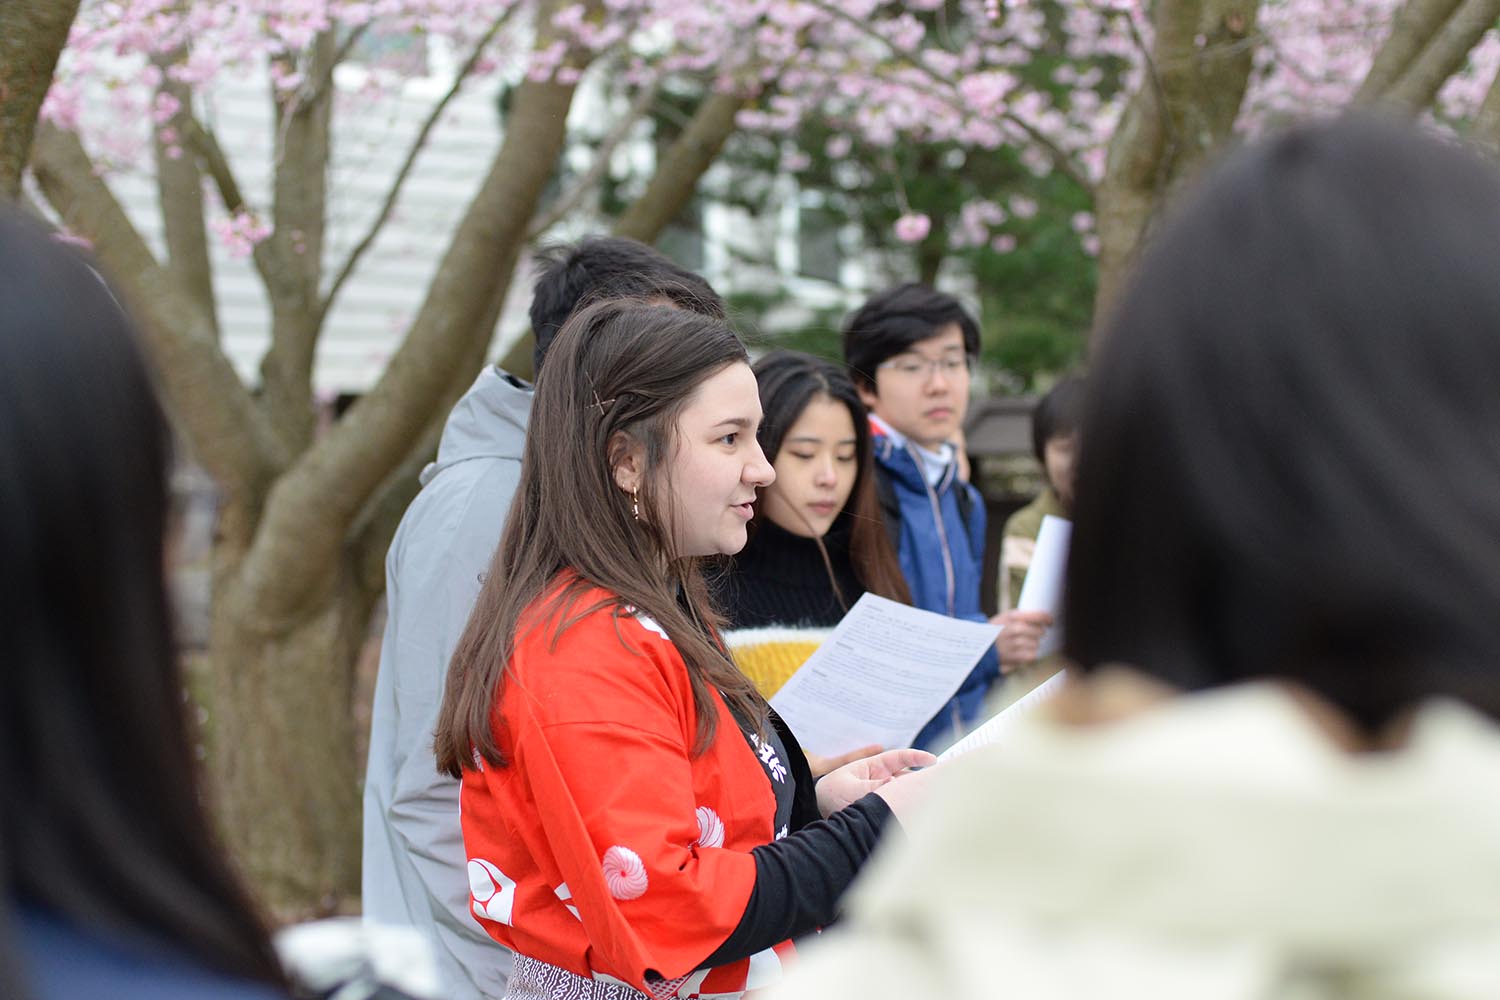 Students enrolled in JAPN218 and JAPN220 courses took turns reading a story—in Japanese and English—about the CEAS's cherry trees. 